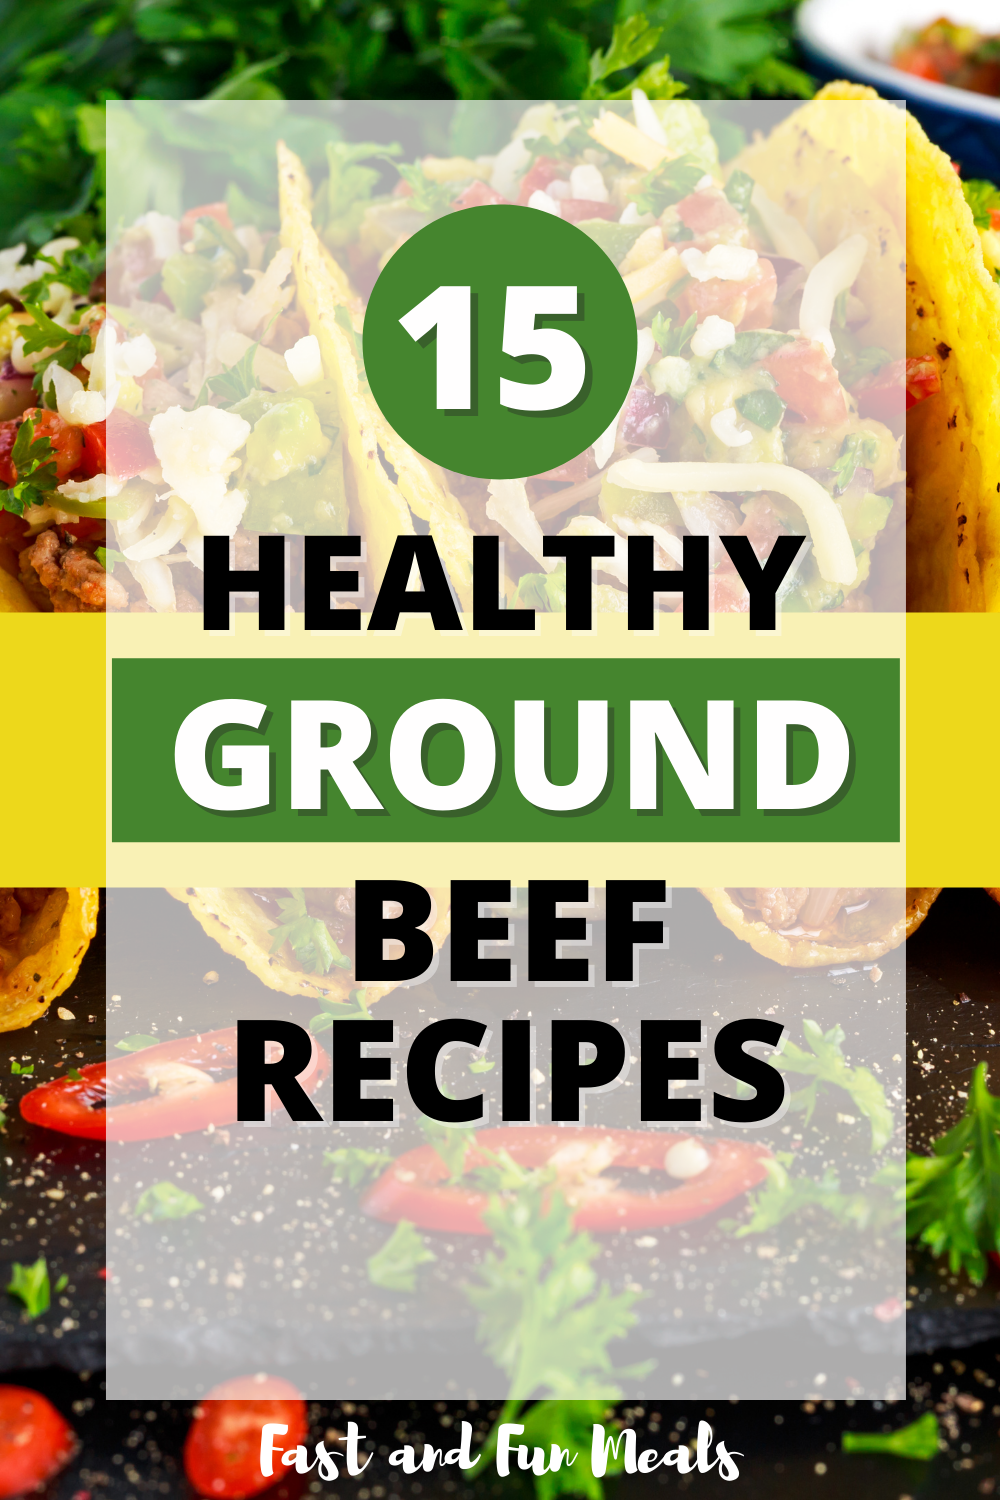 Pin showing the title 15 Healthy Ground Beef Recipes